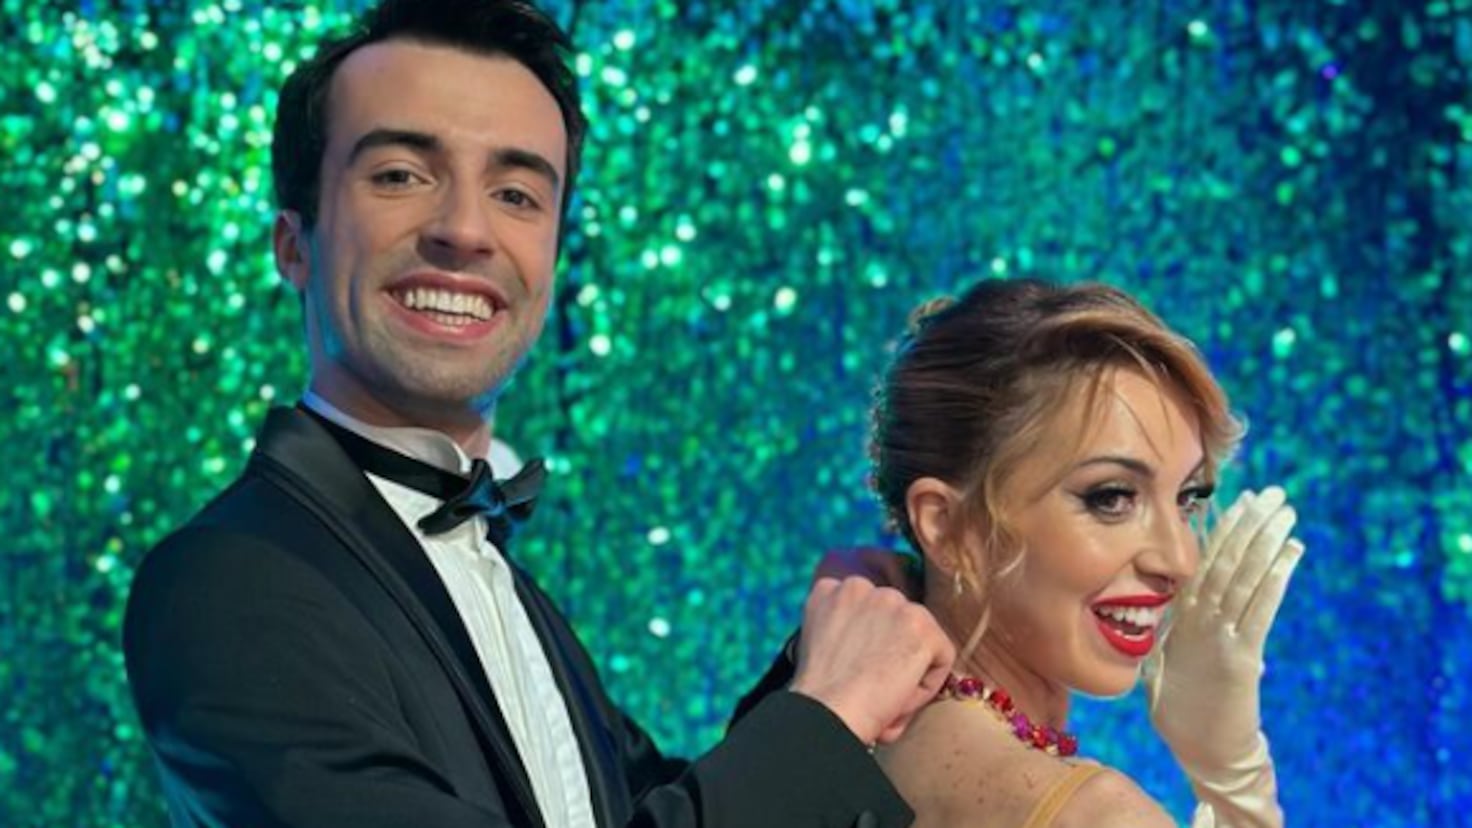 Bruno Vila, from Mozos de Arousa, finalist of Dancing with the Stars: He will be a fair winner
